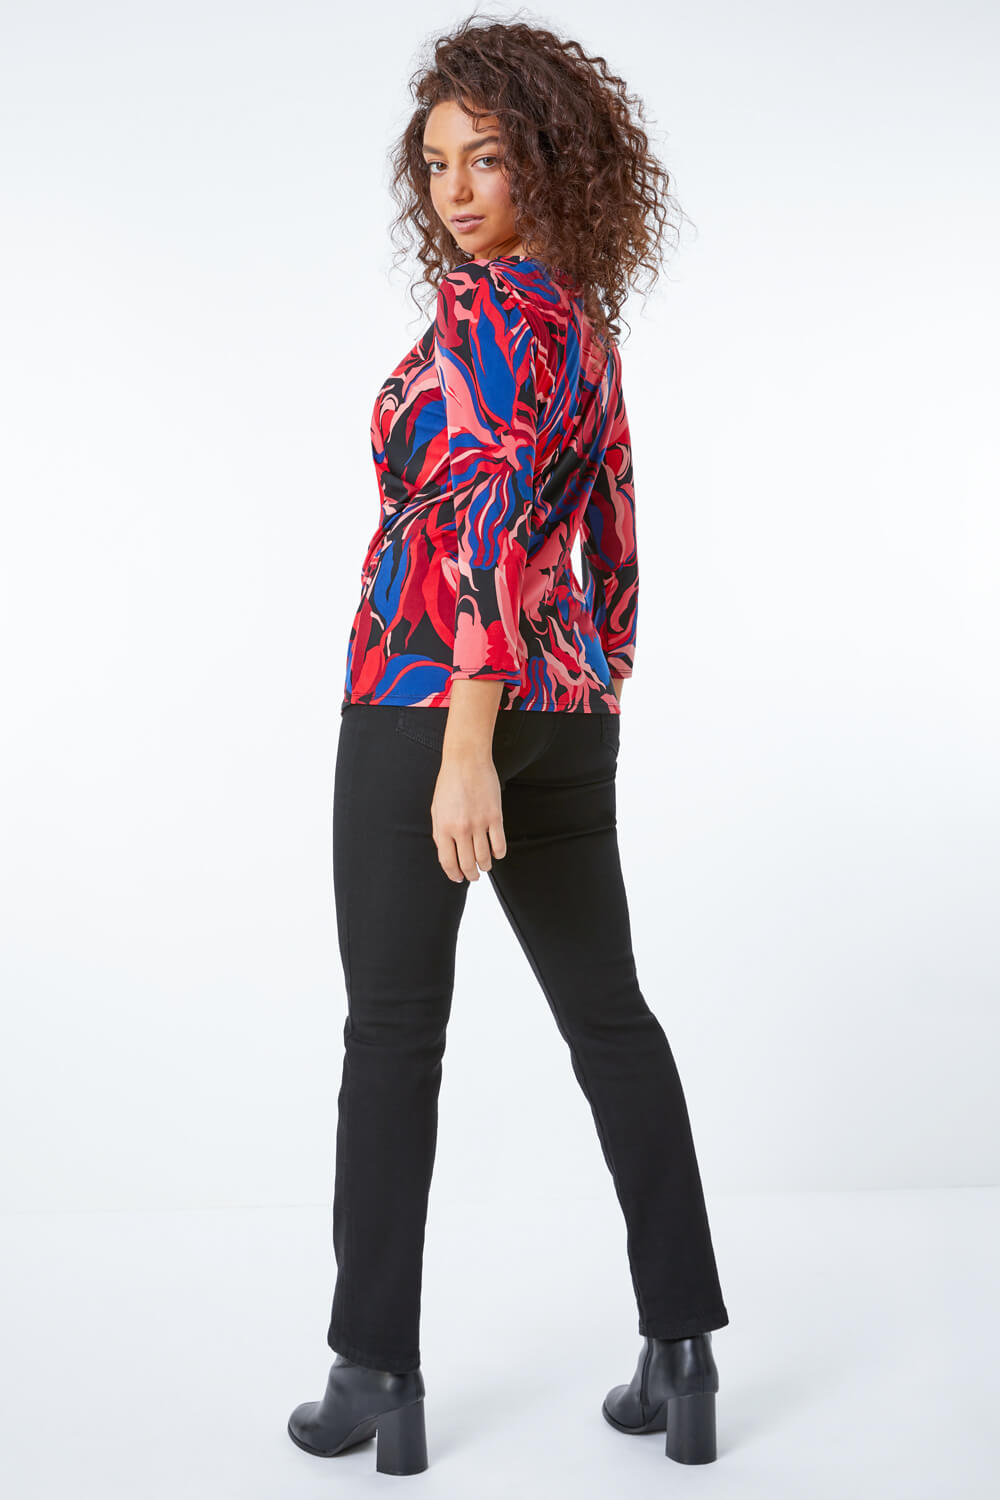 CORAL Petite Abstract Floral Ruched Top, Image 3 of 5